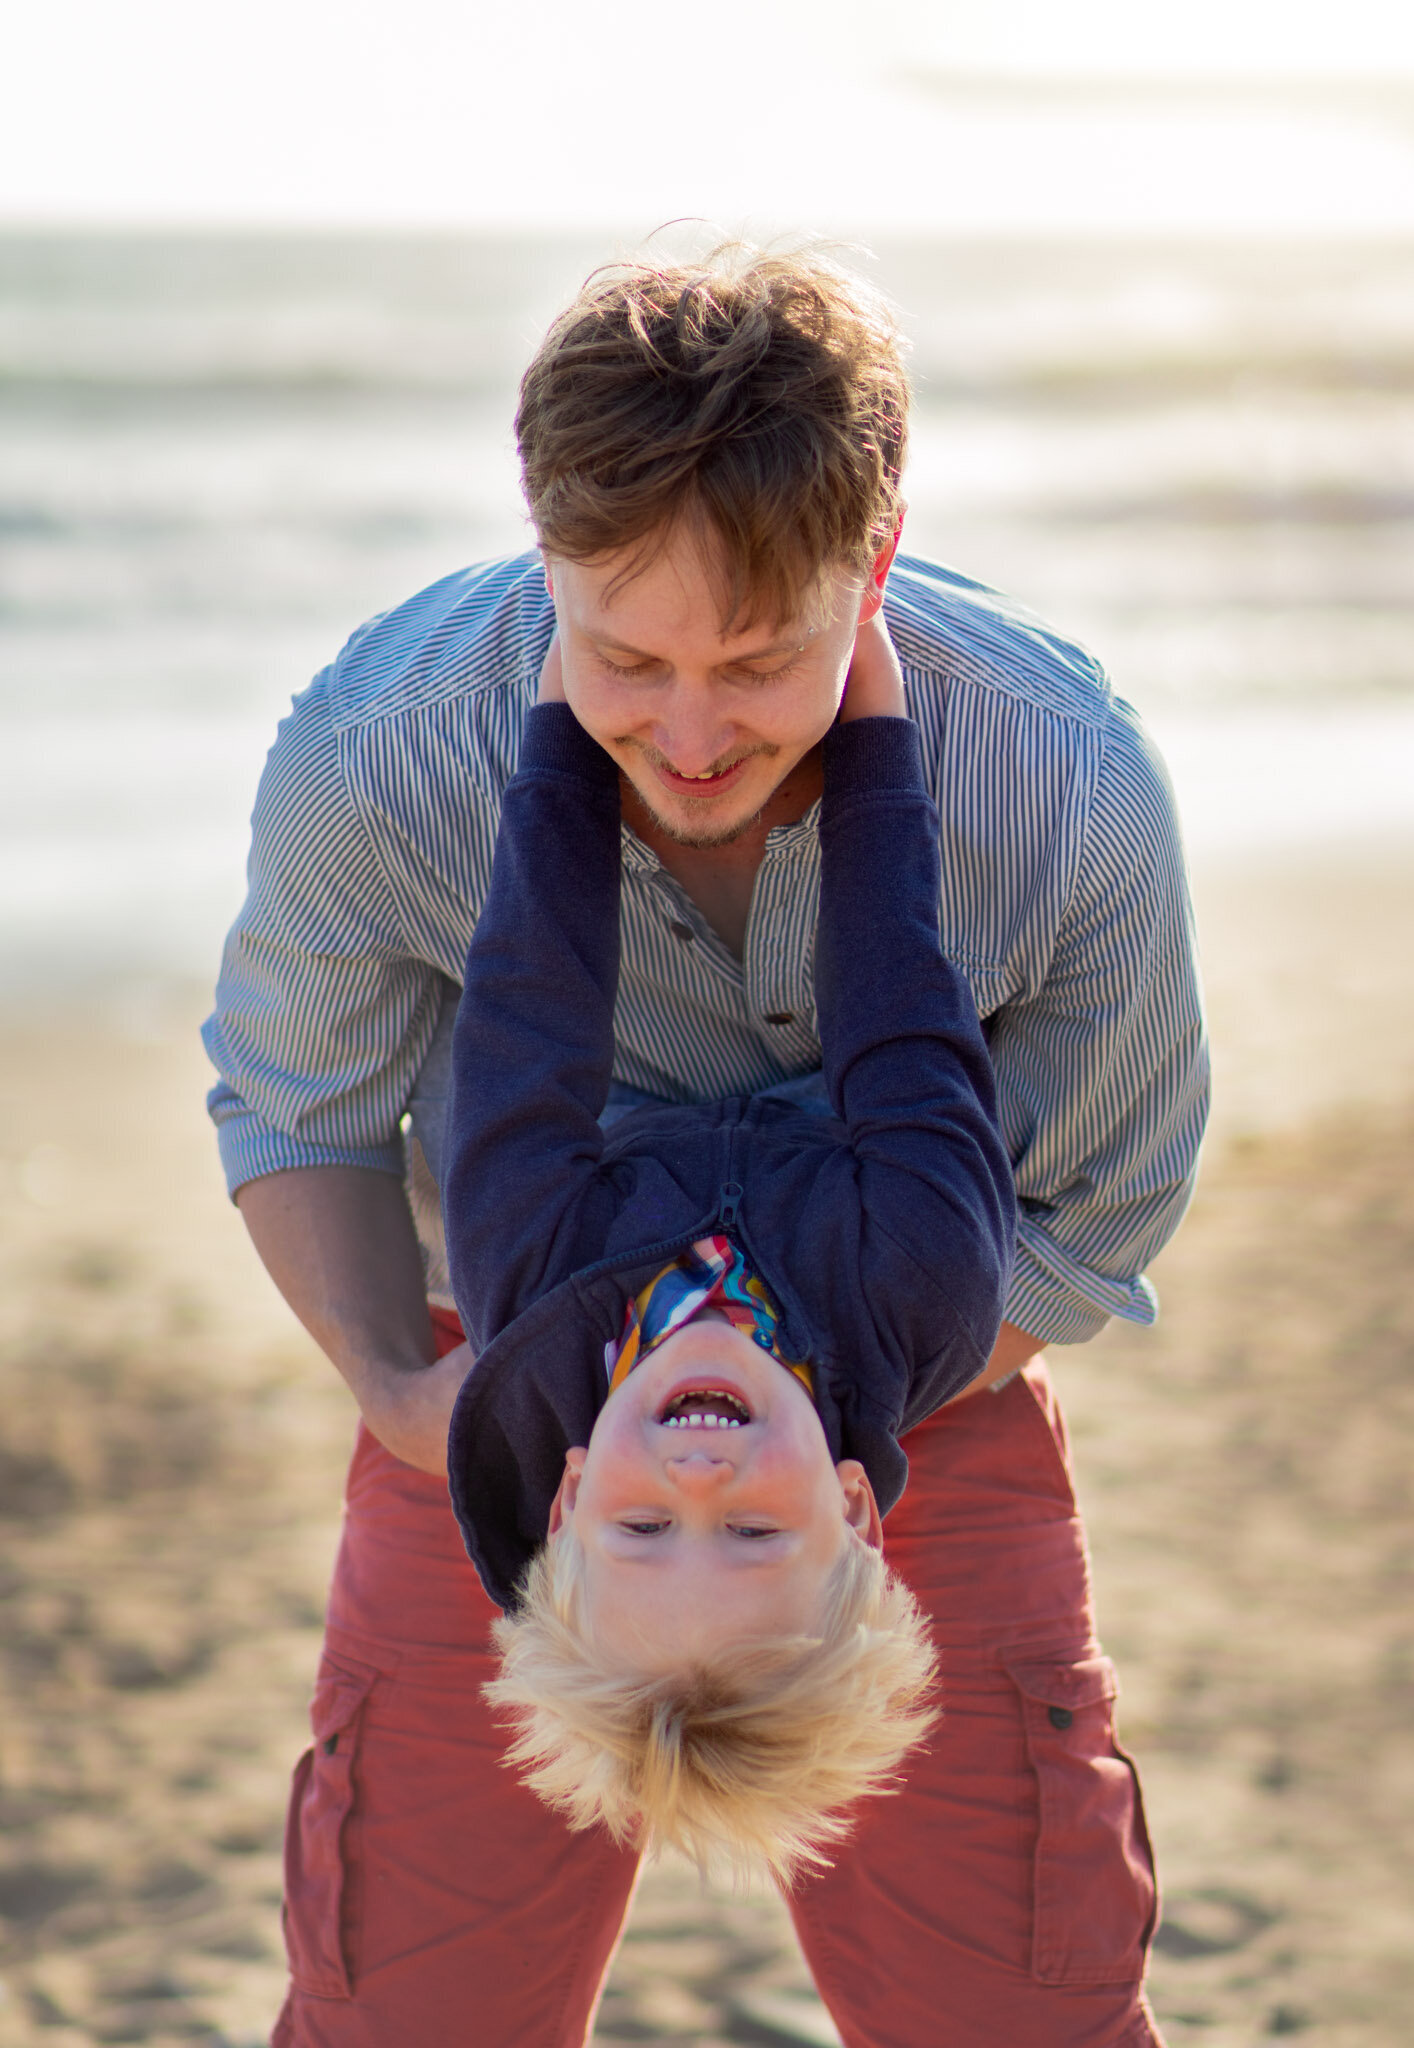 Boy hangs upside down for fun picture in Family photoshoot on the beach in Devon